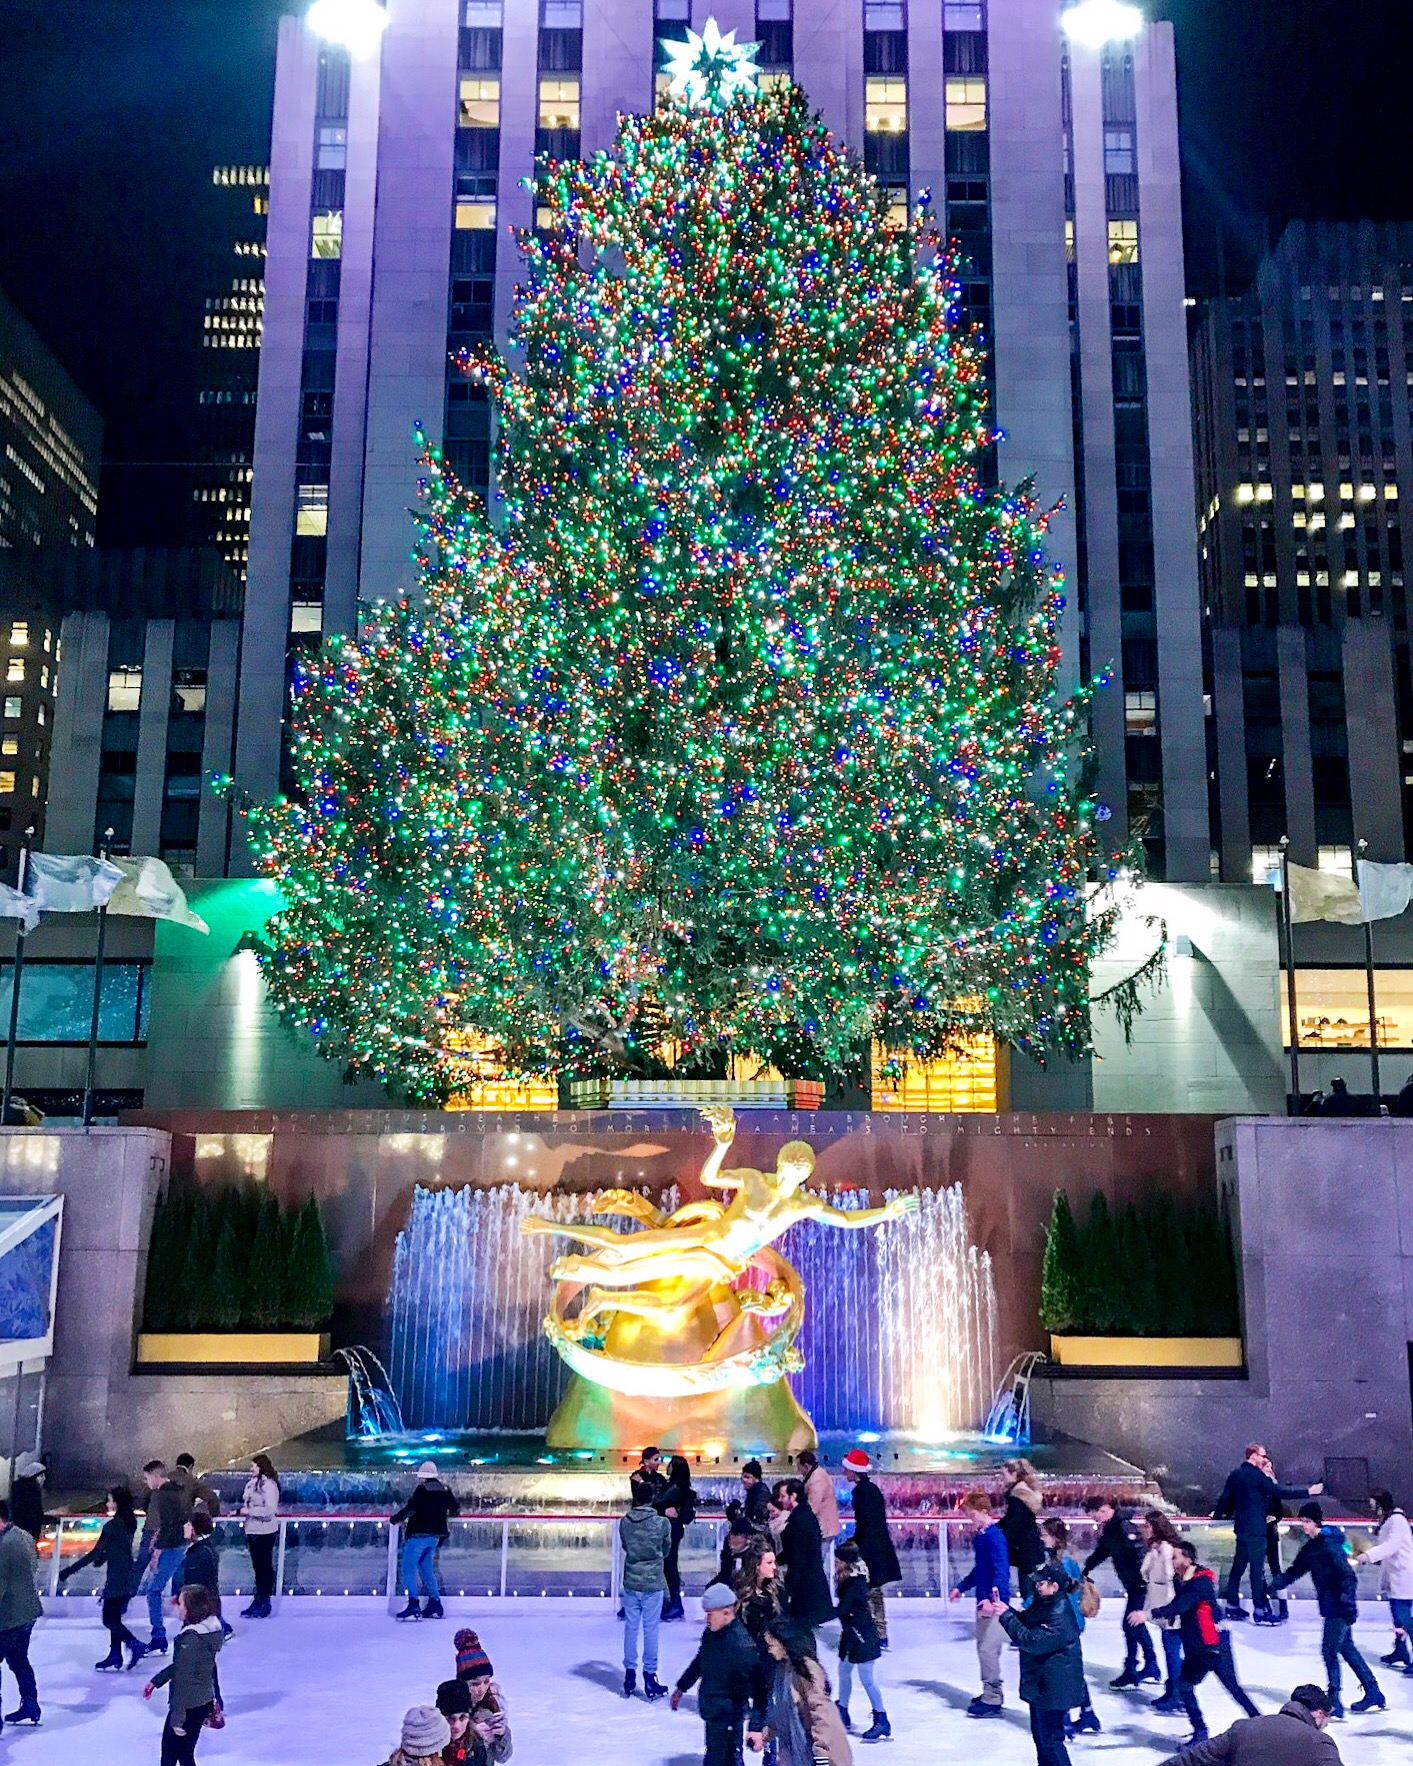 How to Spend 48 Magical Hours in New York City During the Holiday Season